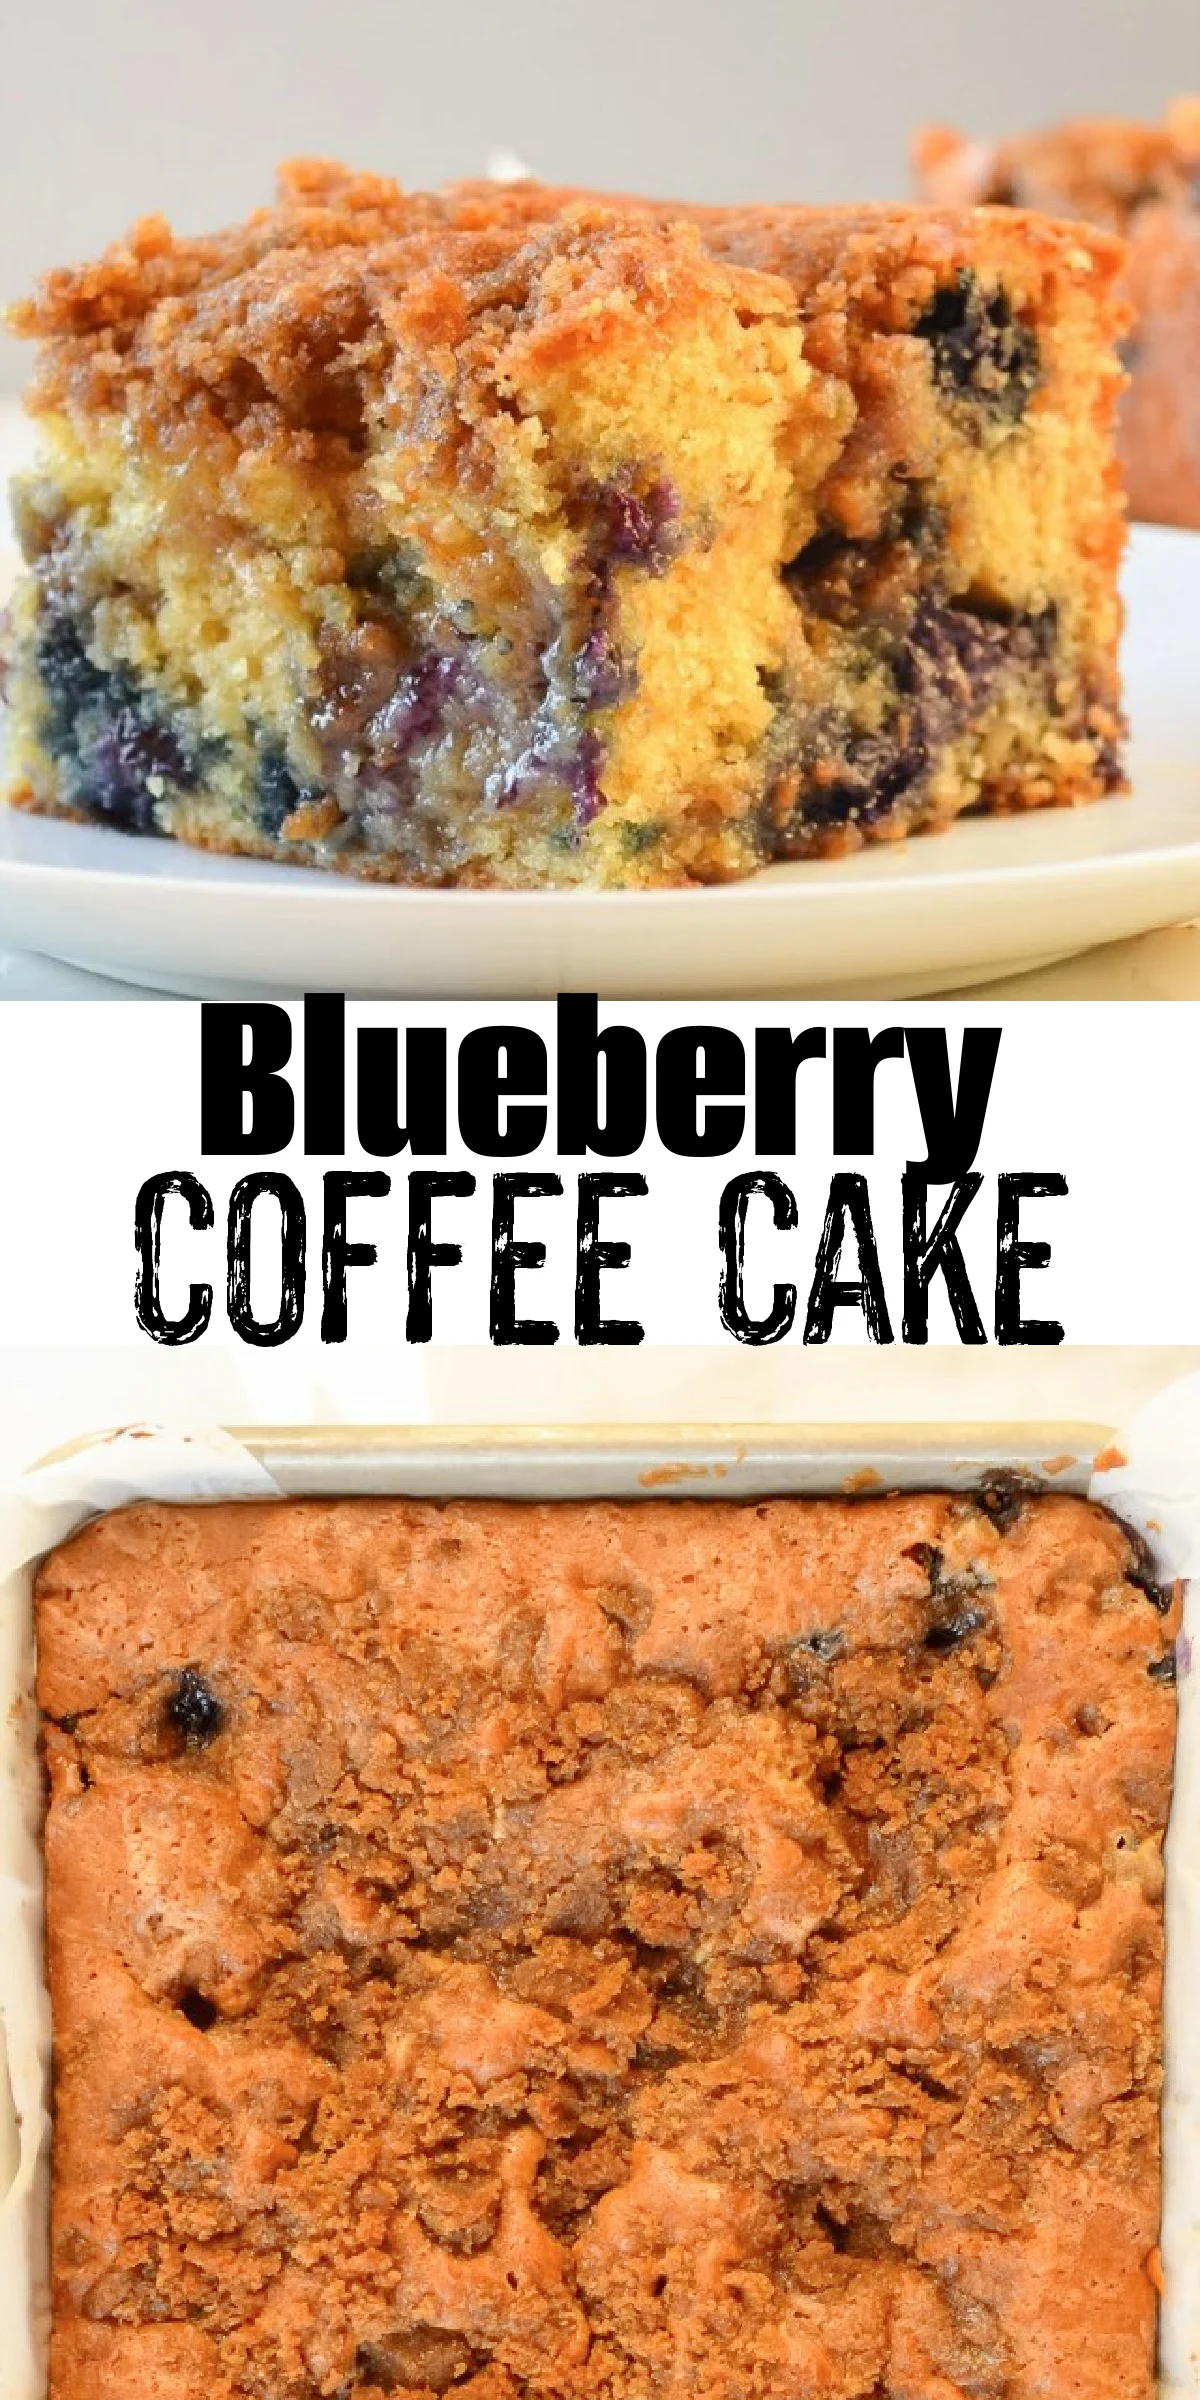 2 Photos the top photo is of a slice of Blueberry Coffee Cake on a white plate. The bottom photo is of down shot of Blueberry Coffee Cake in a 9"x13 pan. There is a white banner between the two photos with black text Blueberry Coffee Cake.